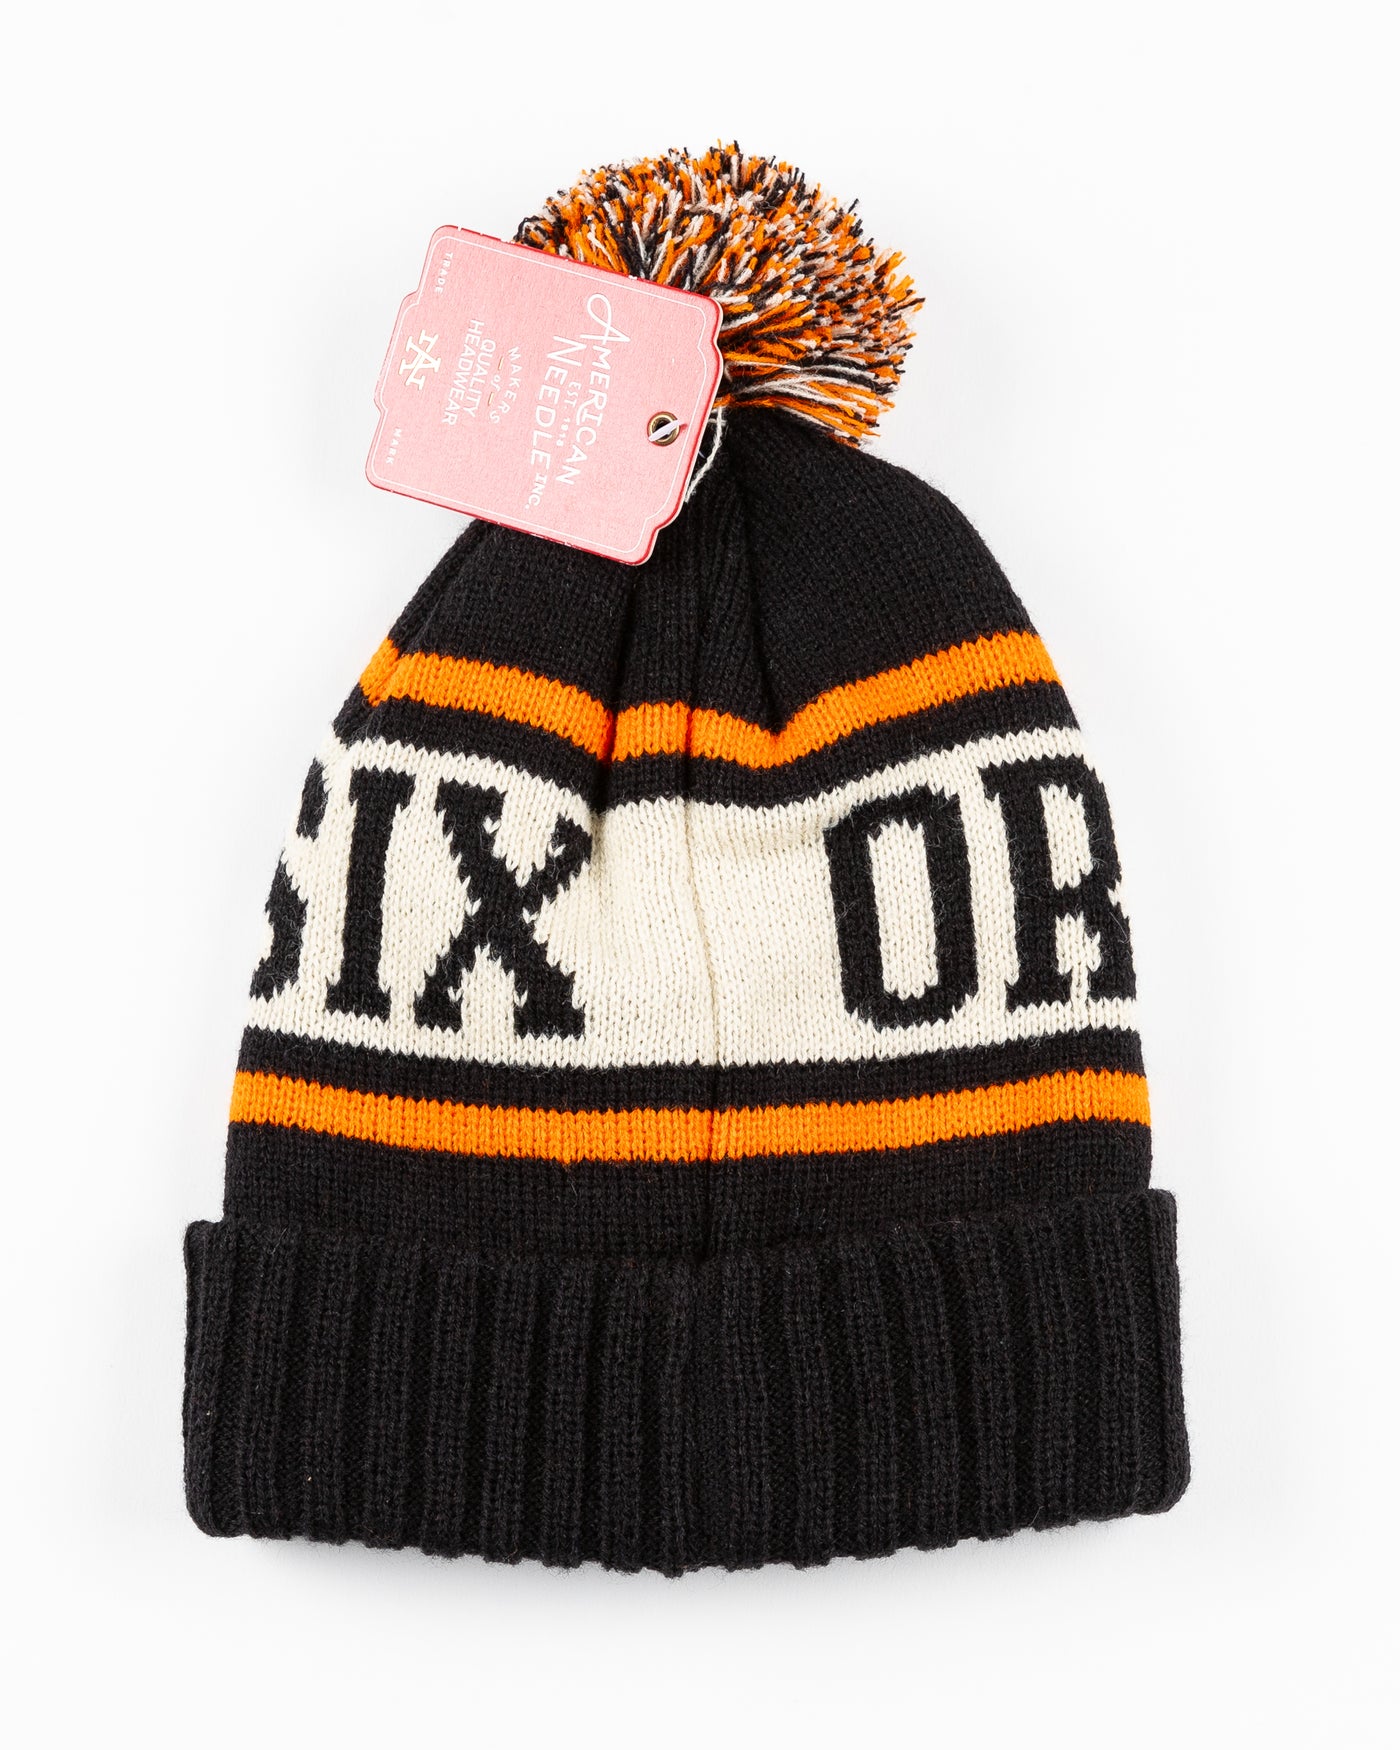 black, beige and orange knit beanie with pom with NHL patch stitched on front cuff - back lay flat